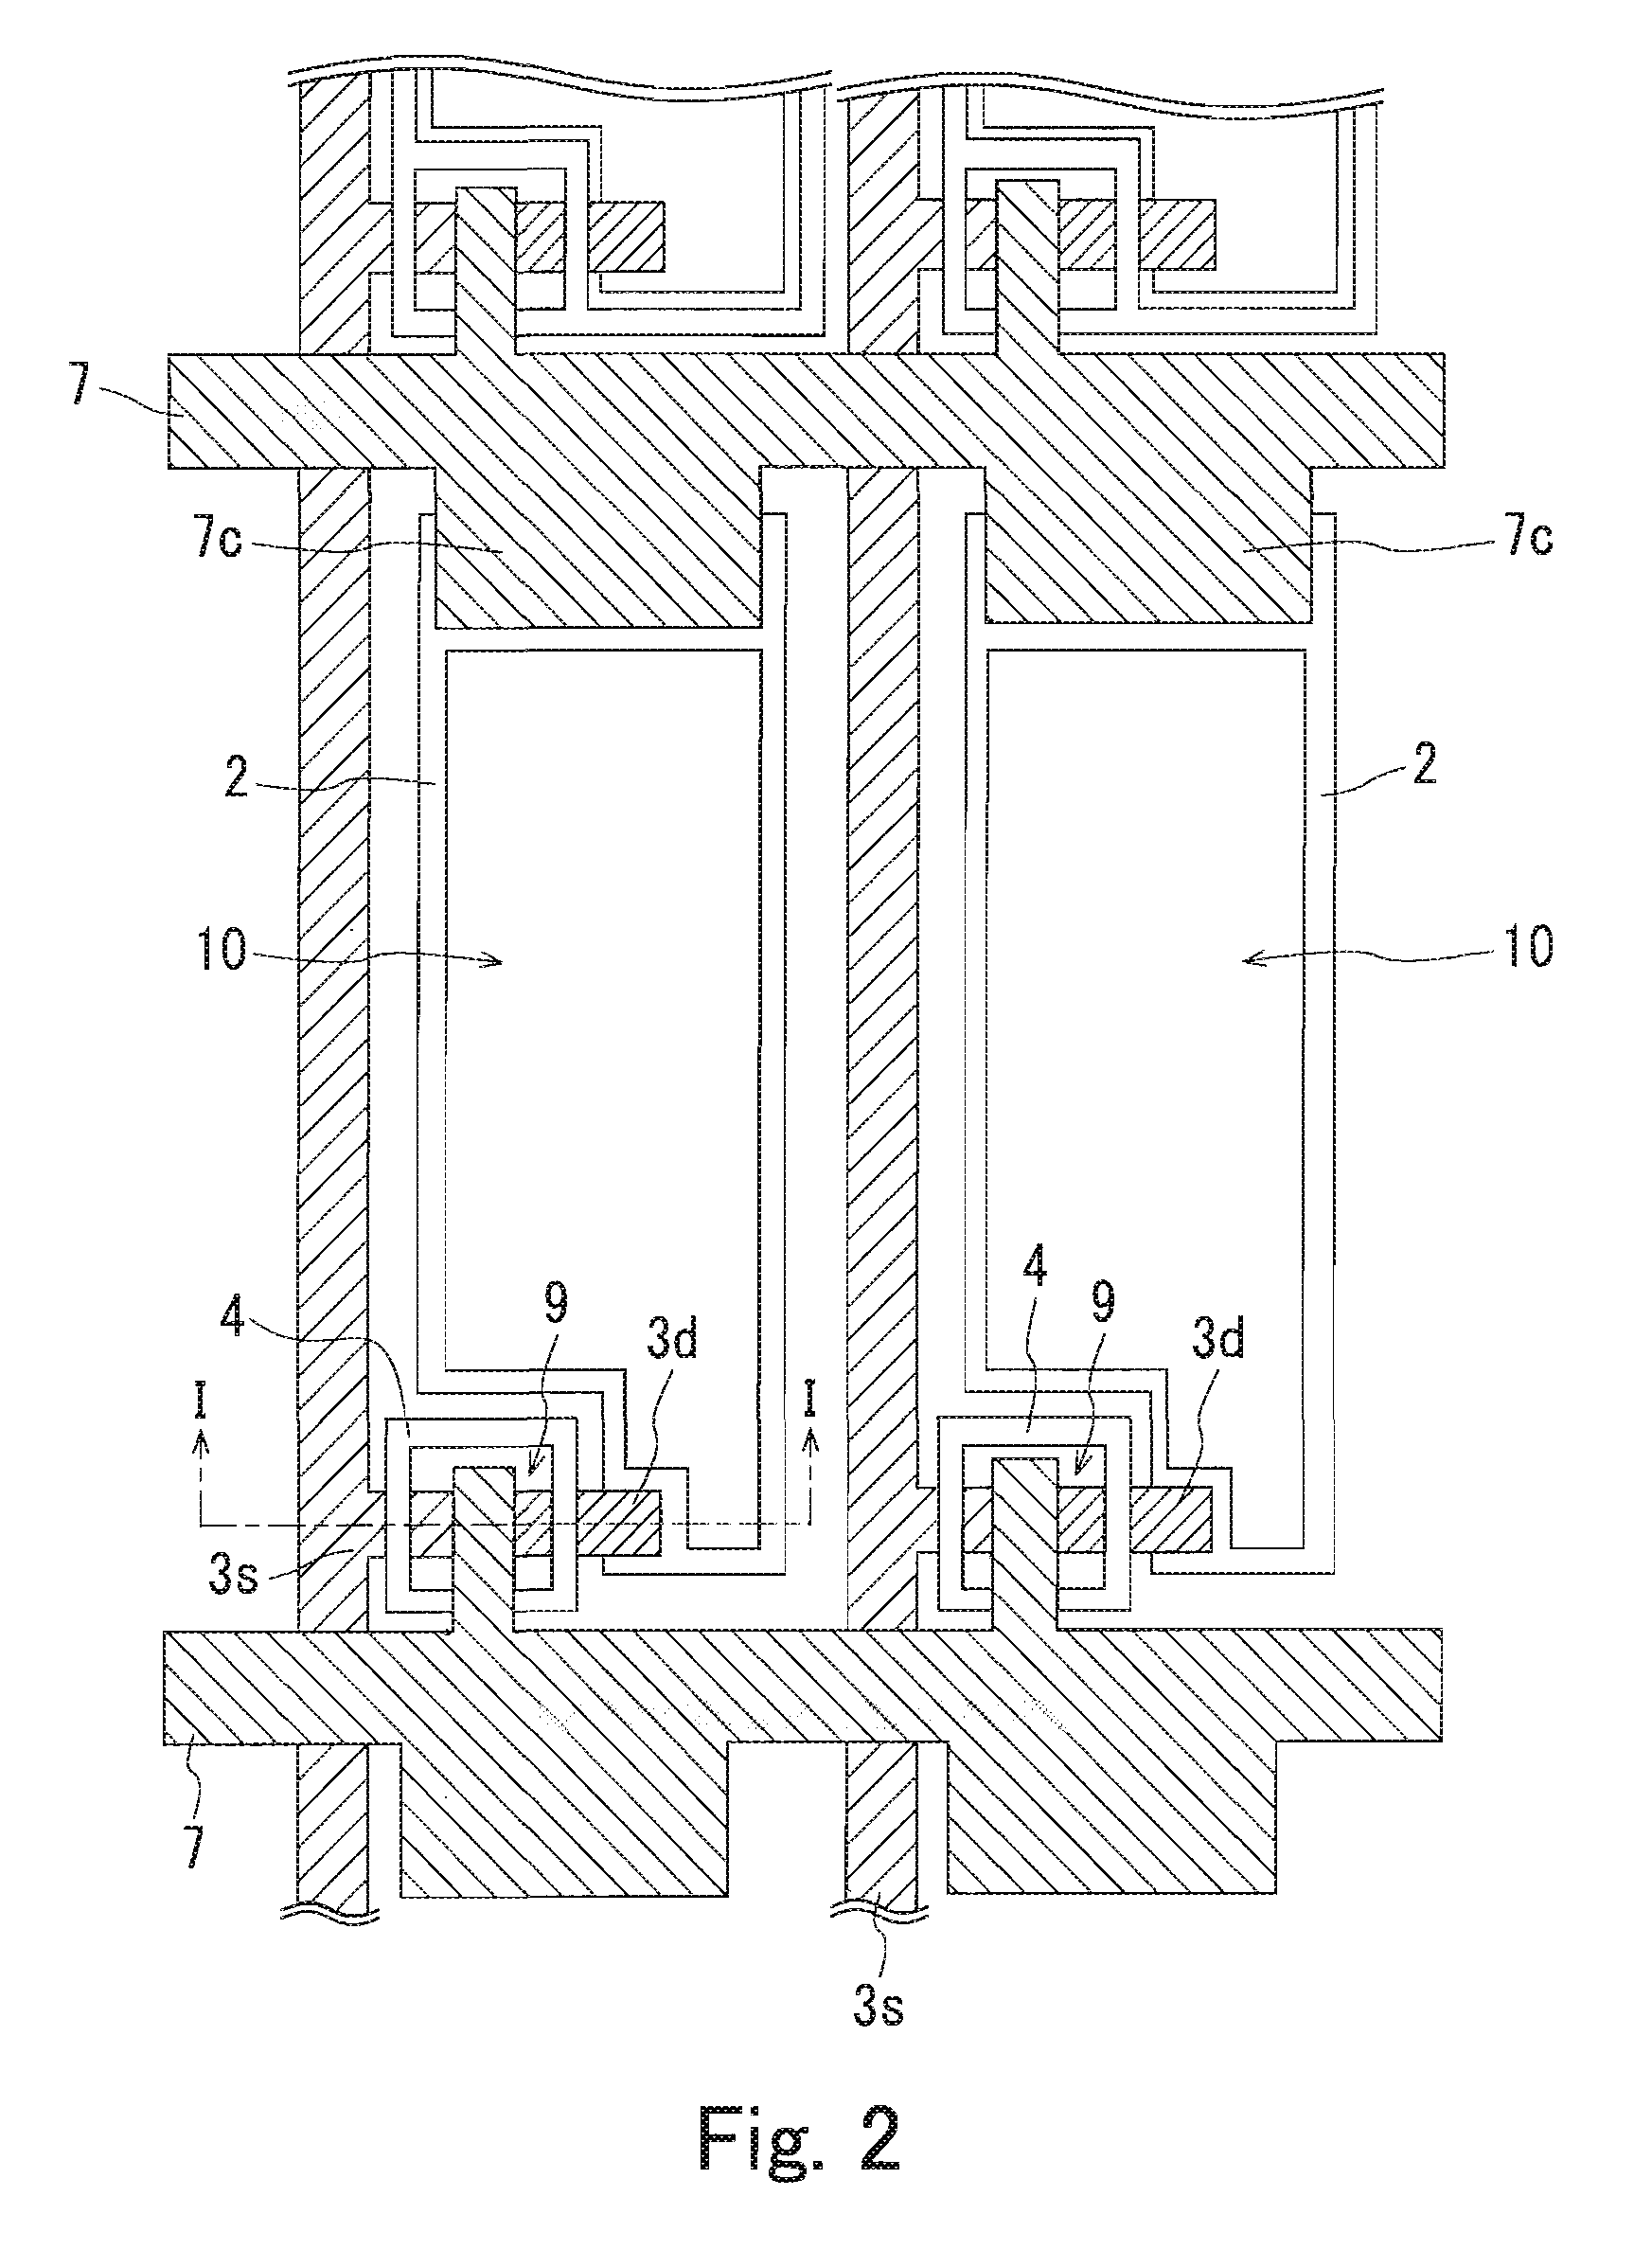 Thin film transistor, method of manufacturing the same, and electronic device using the same